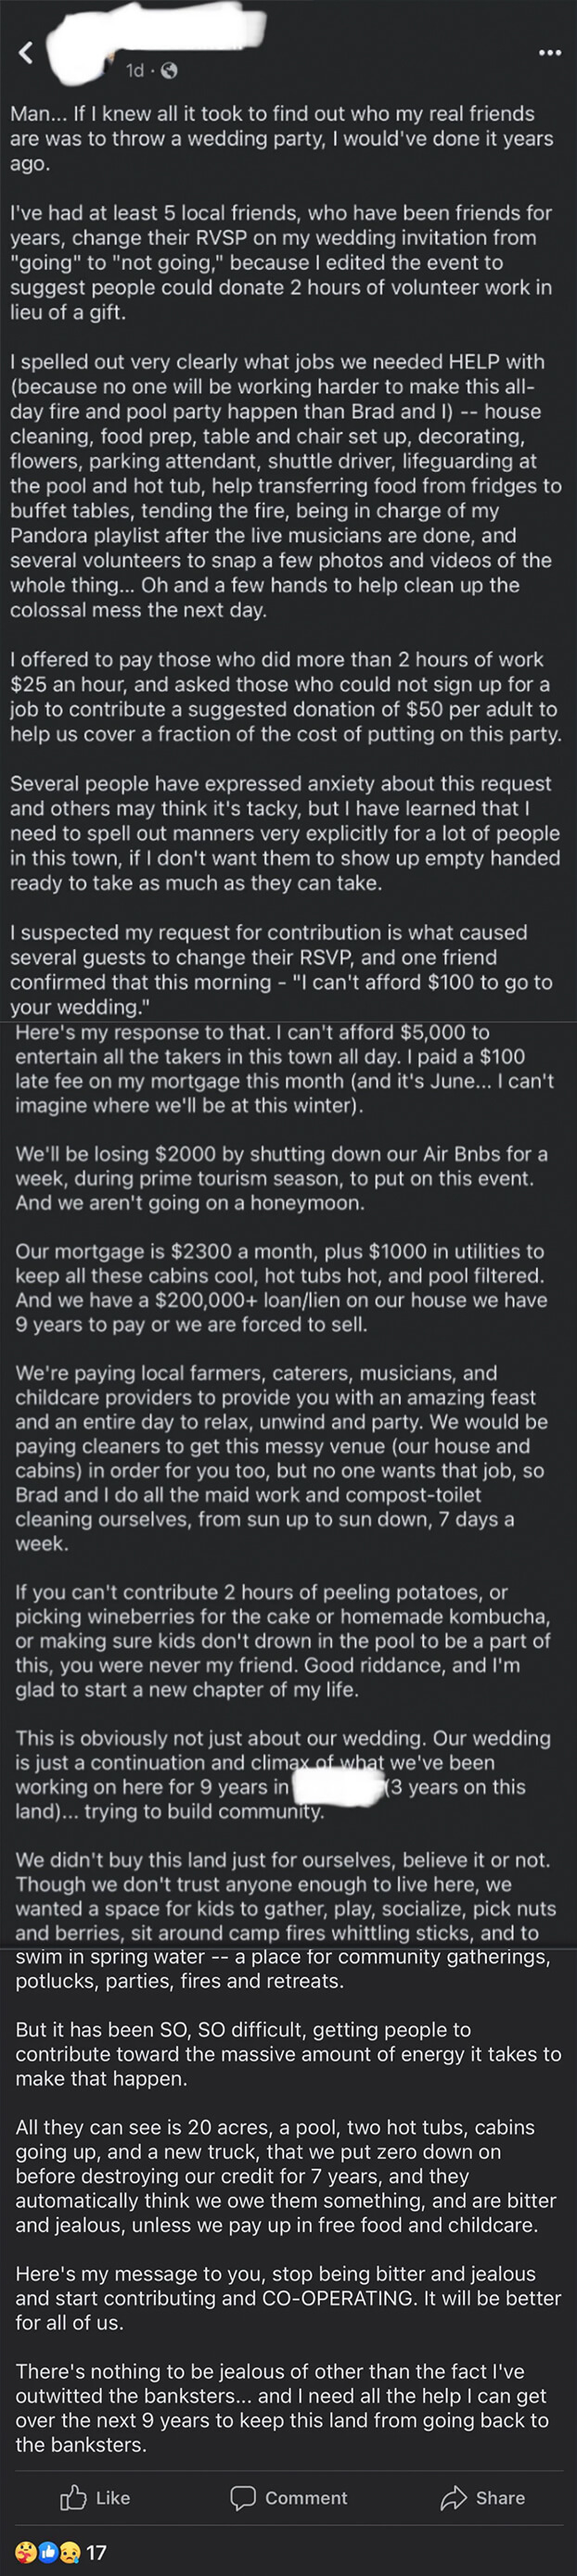 long message about the couple needing to shut down their airbnb so they can host their own wedding there but it&#x27;ll make them lose money so they are demanding people help